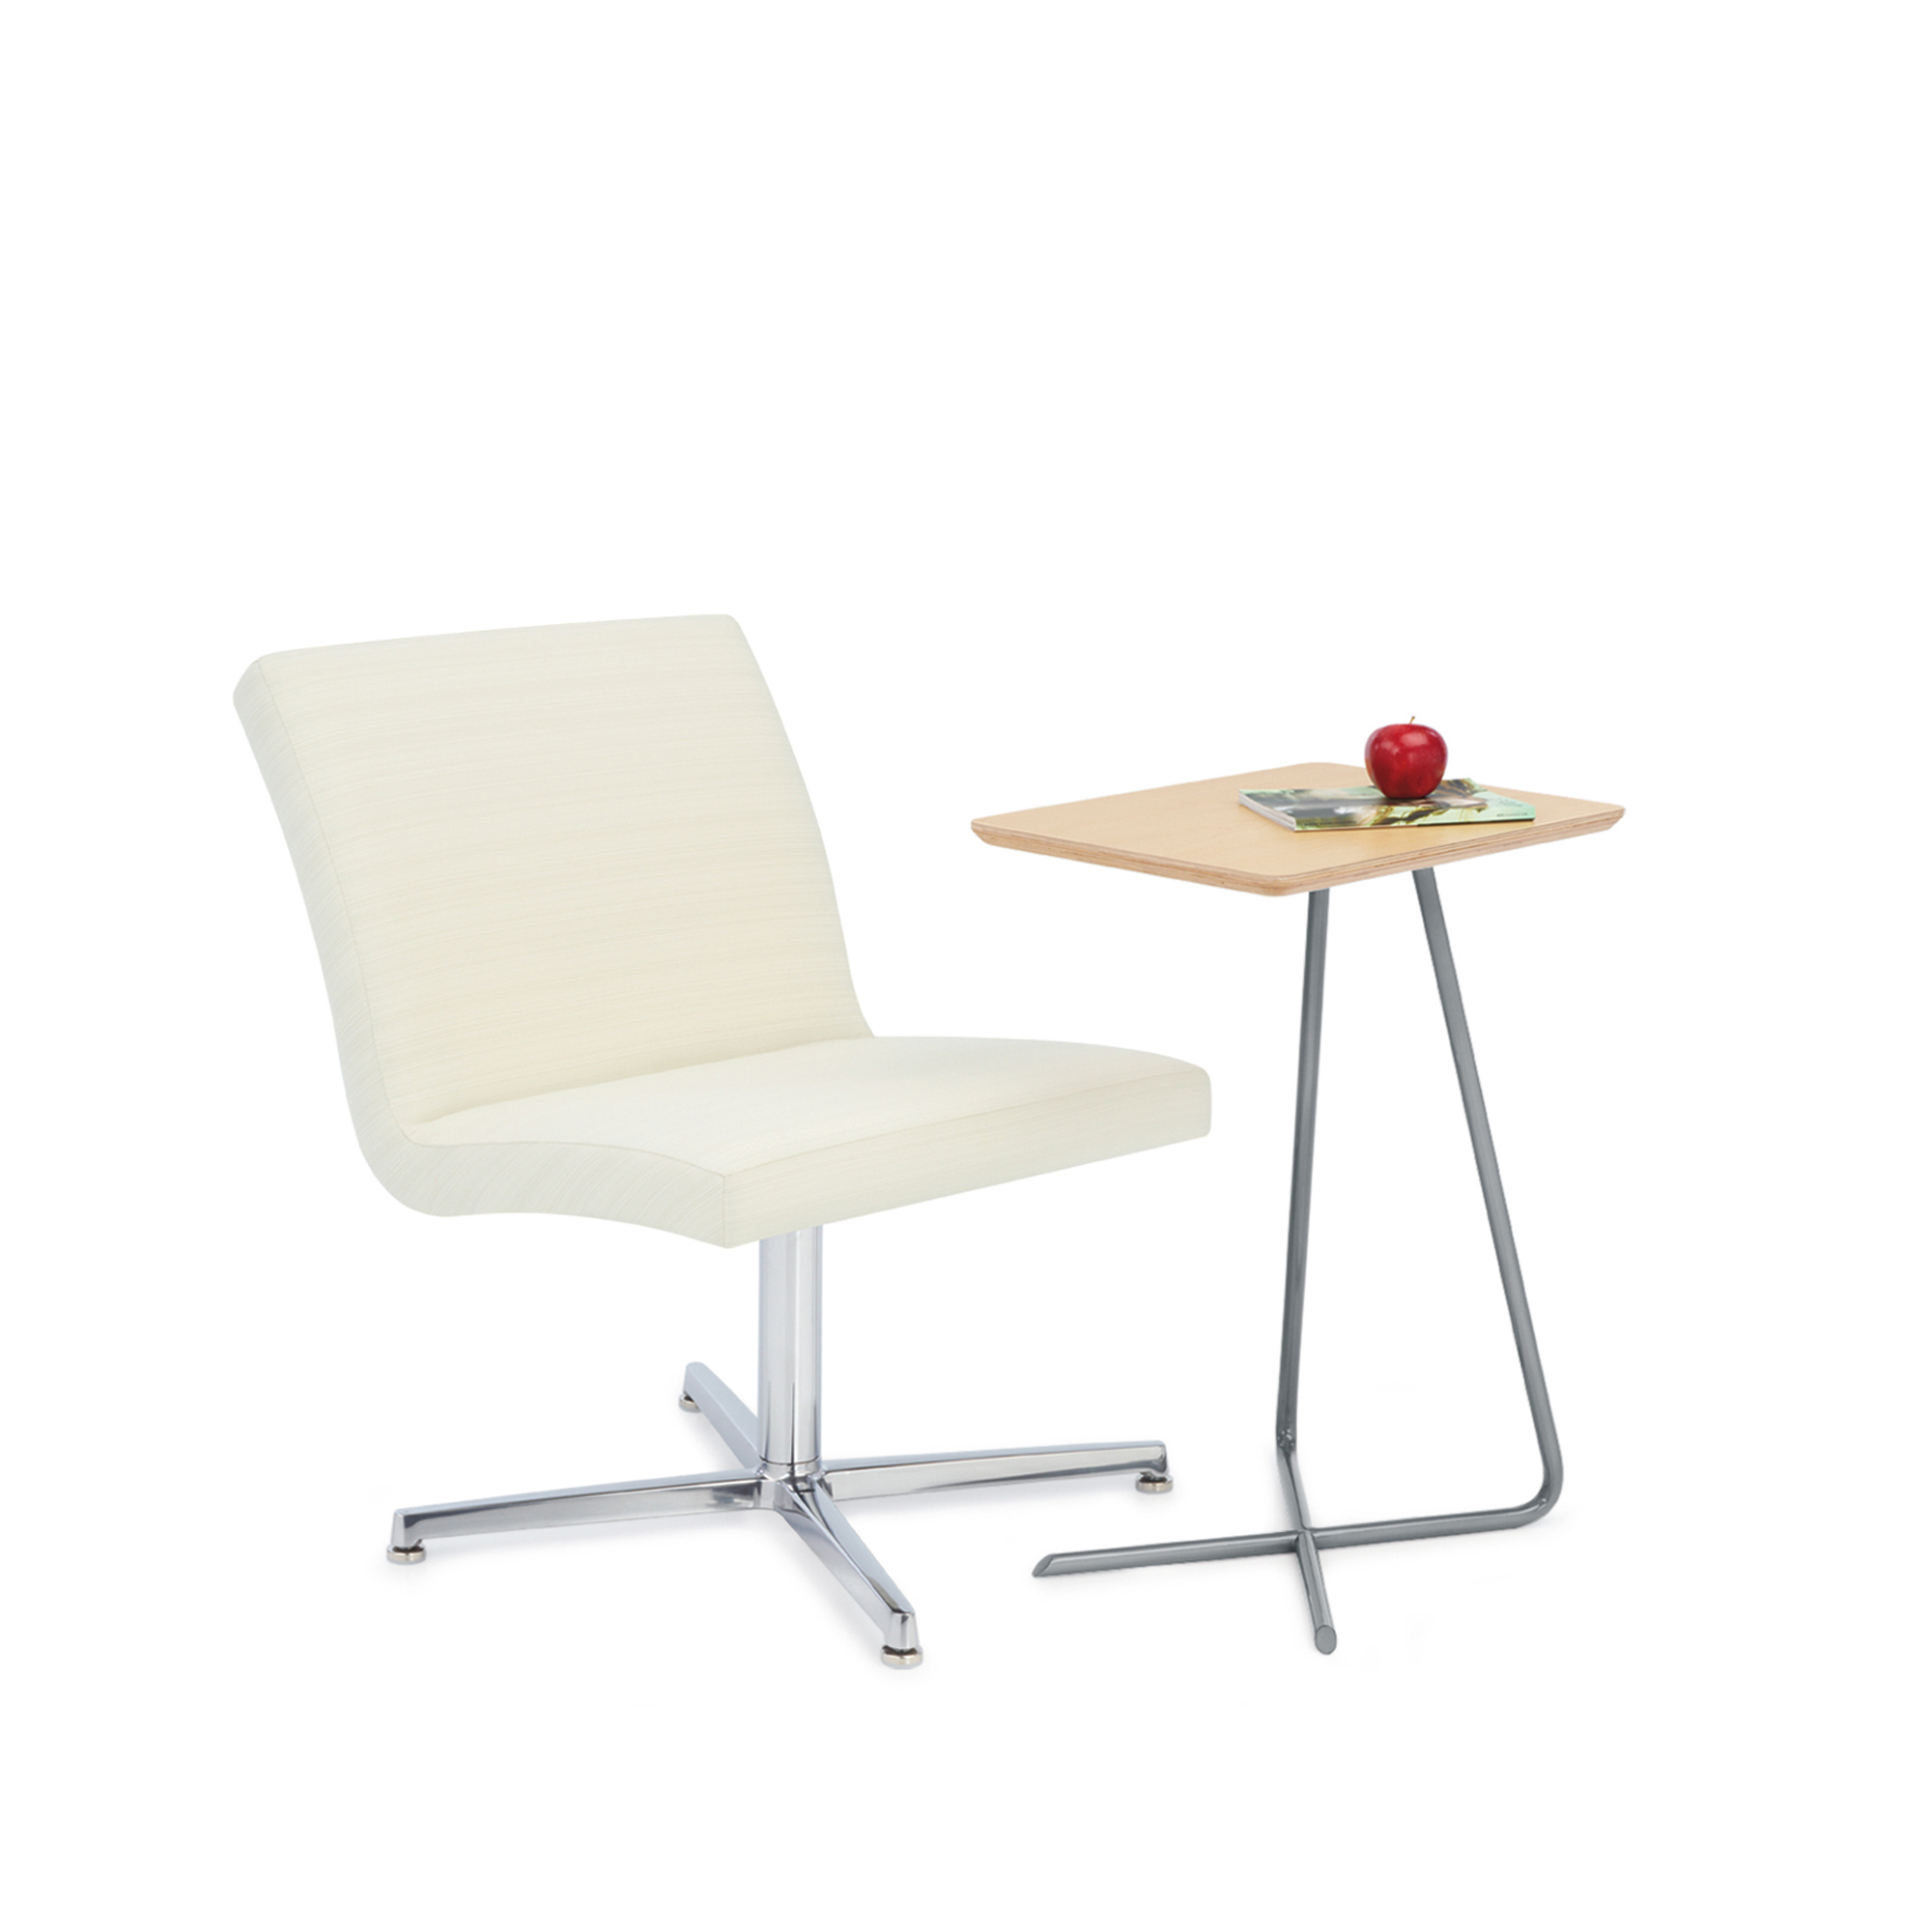 Cielo Pull-up Table with Cielo Lounge Chair